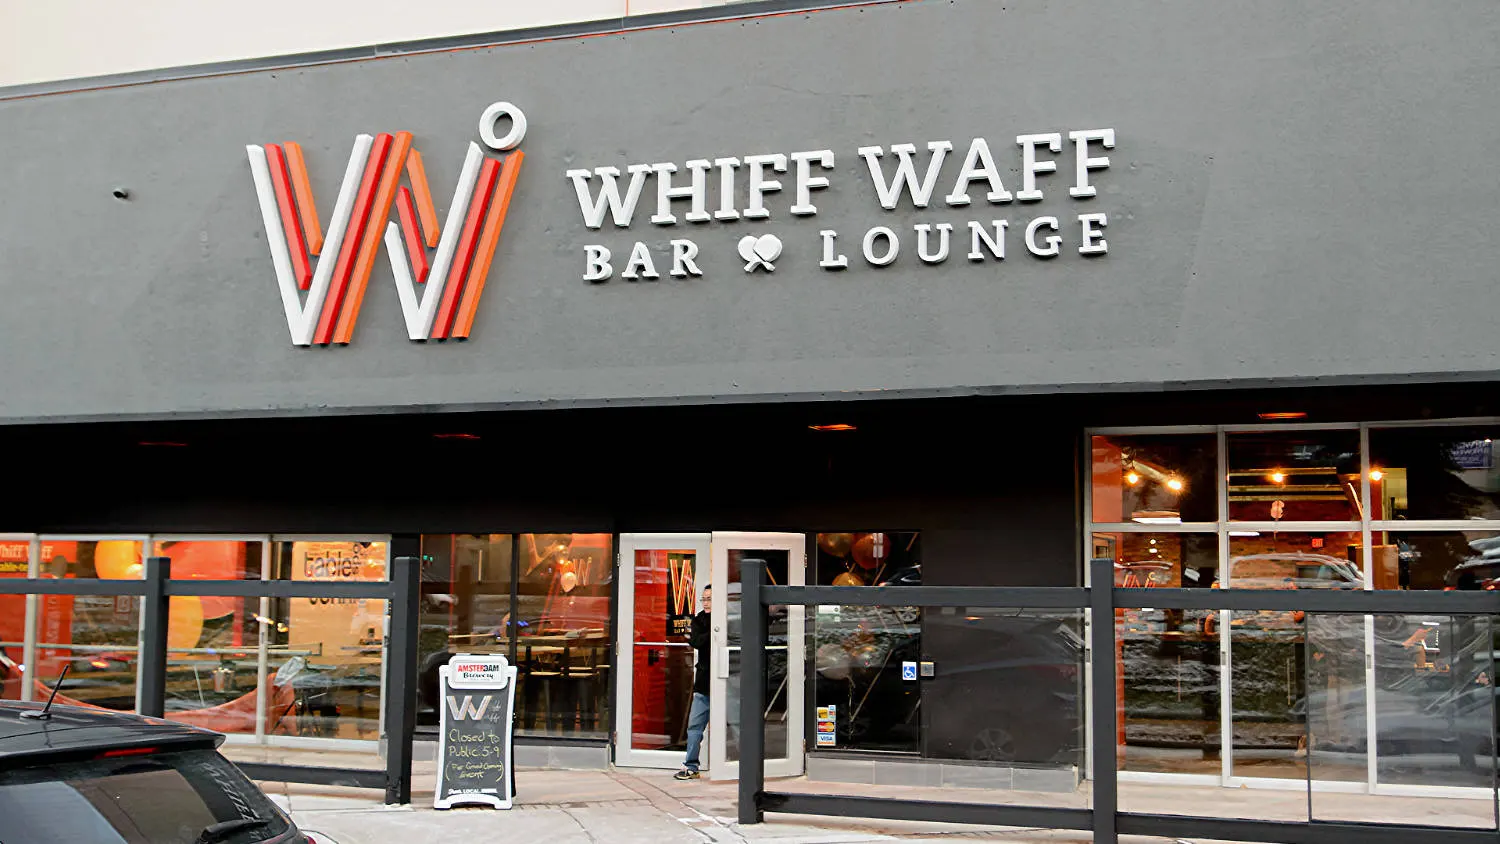 Exterior design project for Whiff Waff Bar & Lounge. Designed storefront